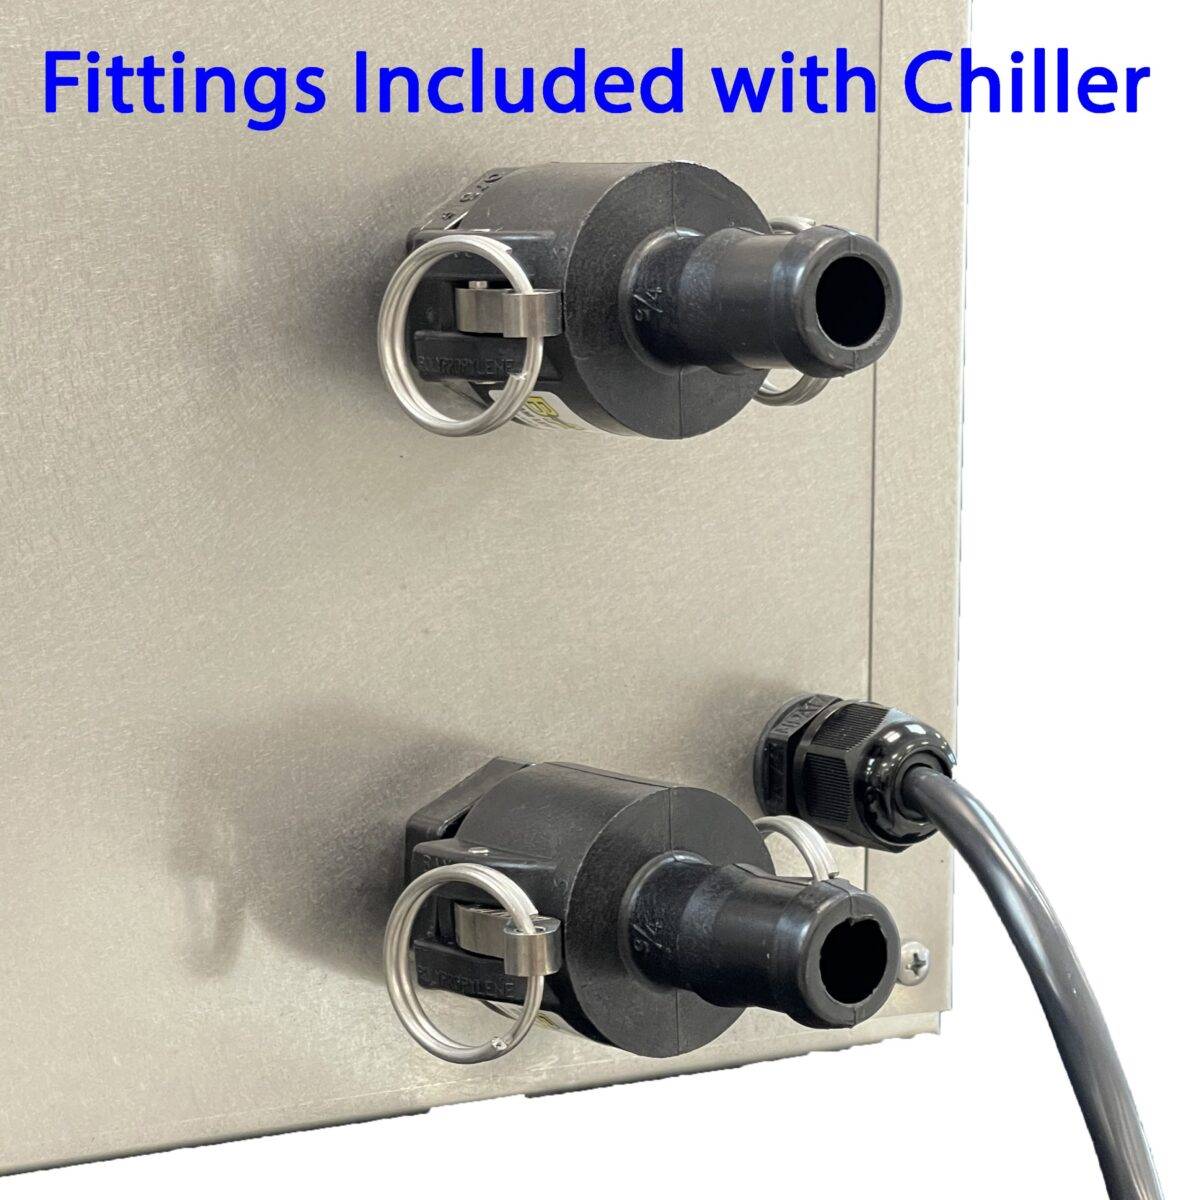 Penguin Chiller Fittings Included Scaled